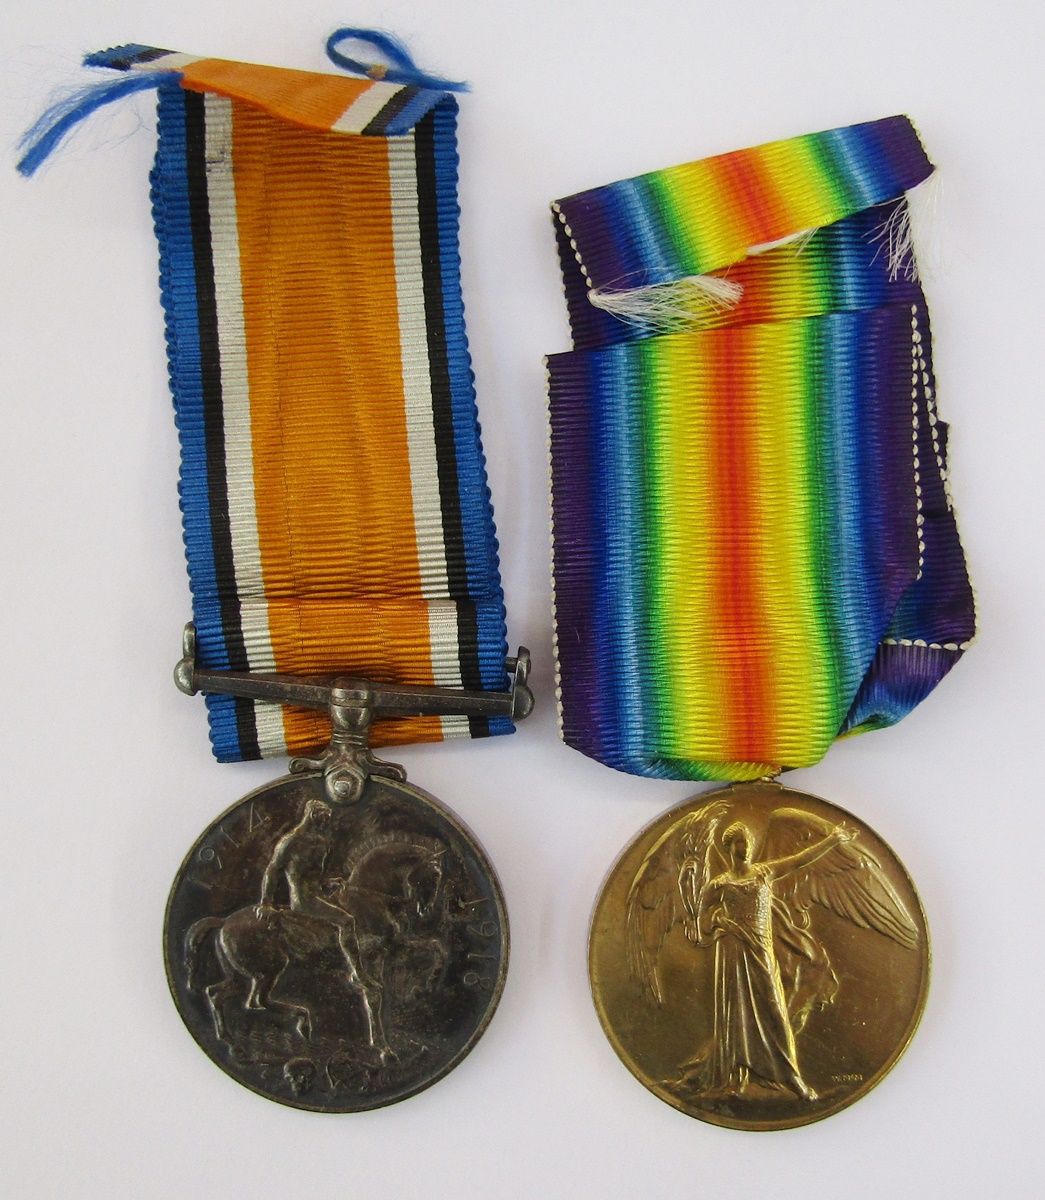 WWI War Medal and Victory Medal named to "166046.PNR.J.SEED.R.E.", Imperial Service Medal in case of